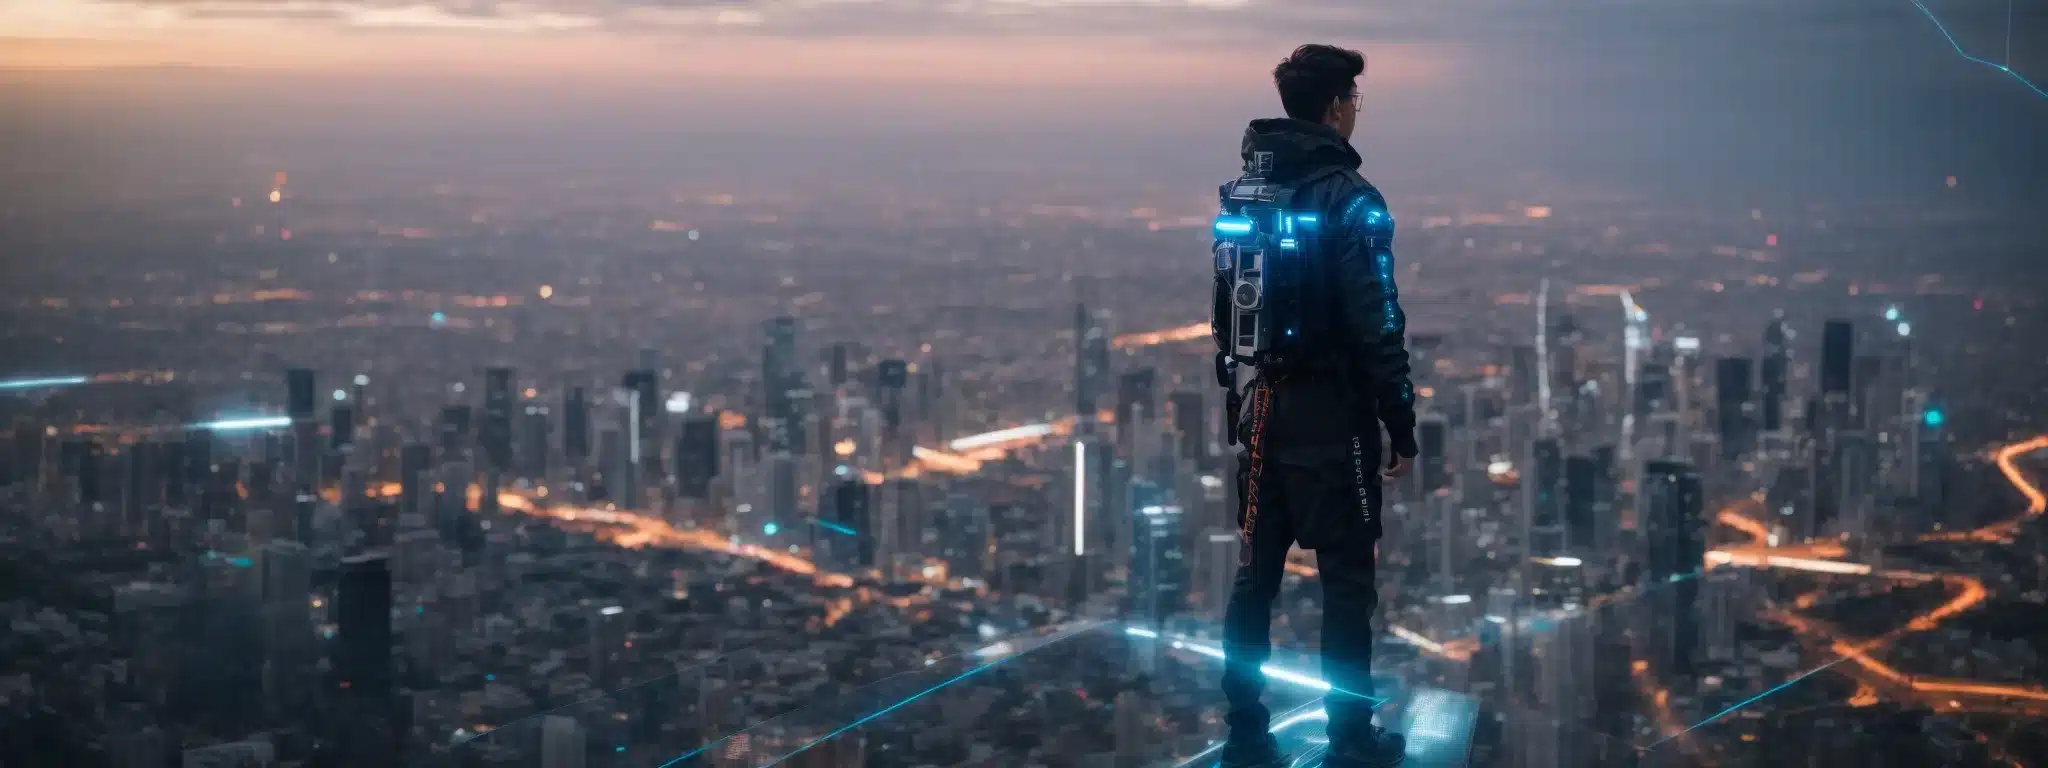 A Trailblazer Stands On The Edge Of A Futuristic Cityscape Horizon, With Holographic Interfaces And Data Streams Flowing In The Sky Above.